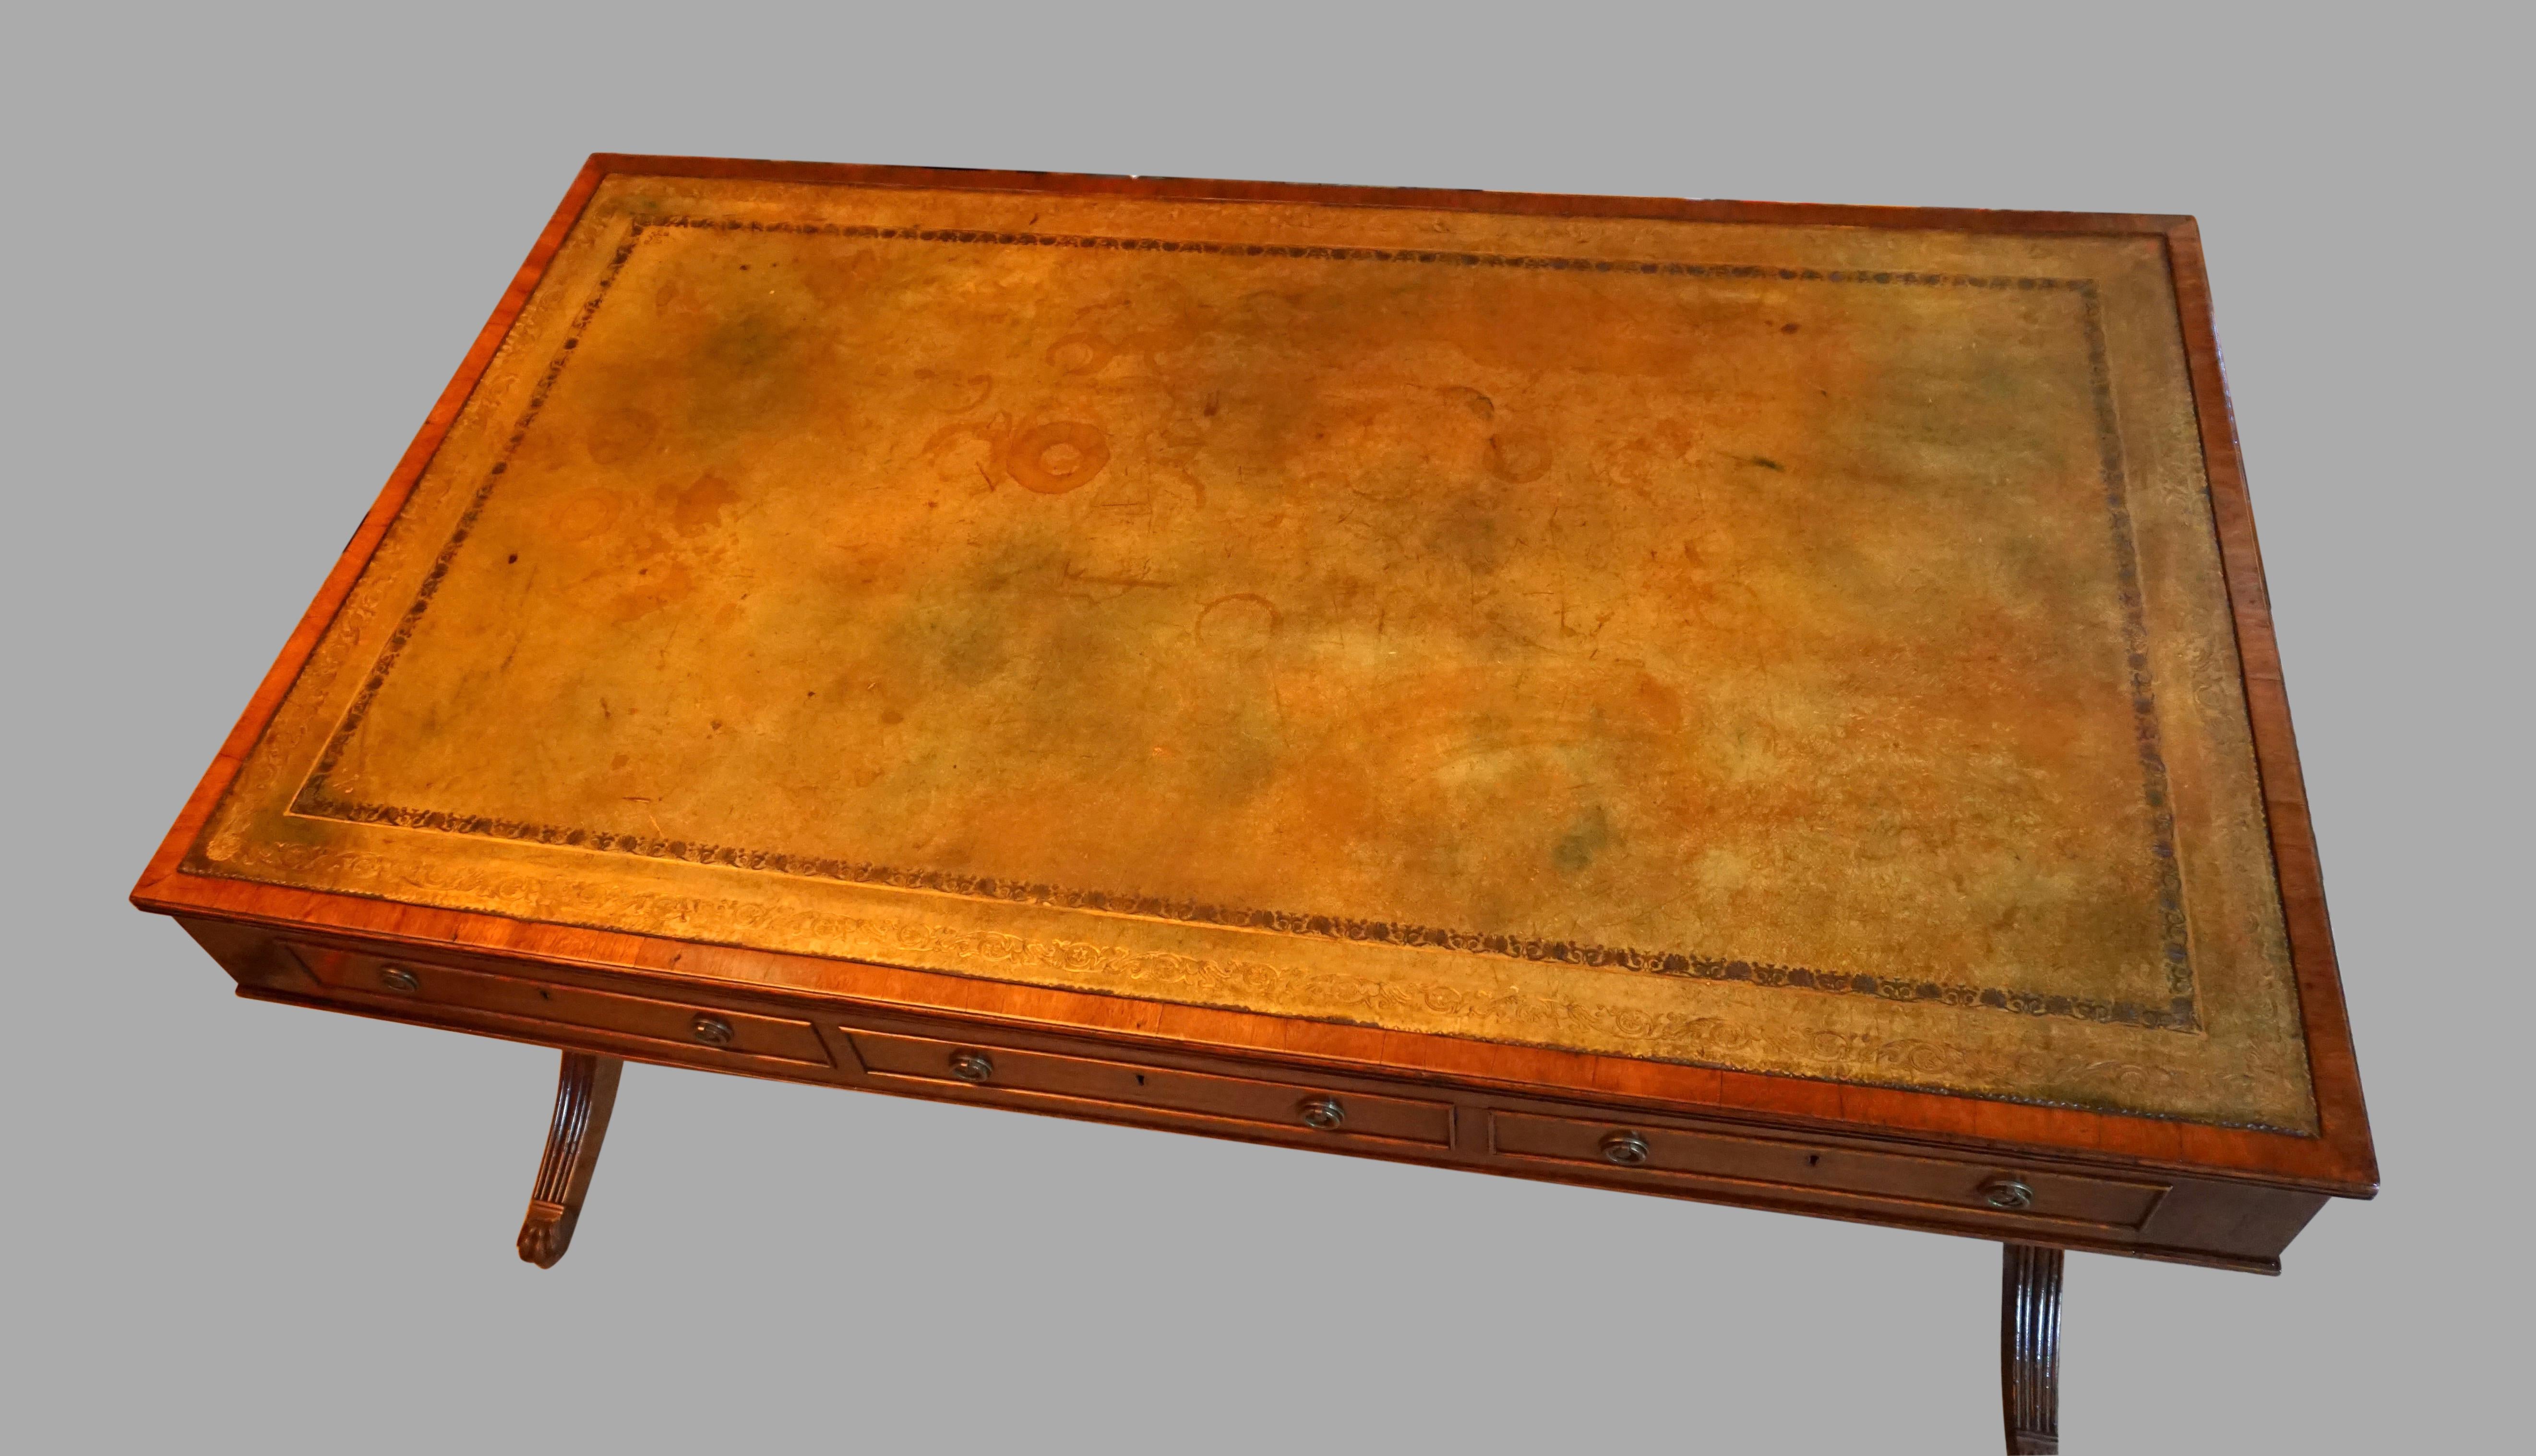 English Regency Style Mahogany Writing Table with Gilt-Tooled Leather Top For Sale 5